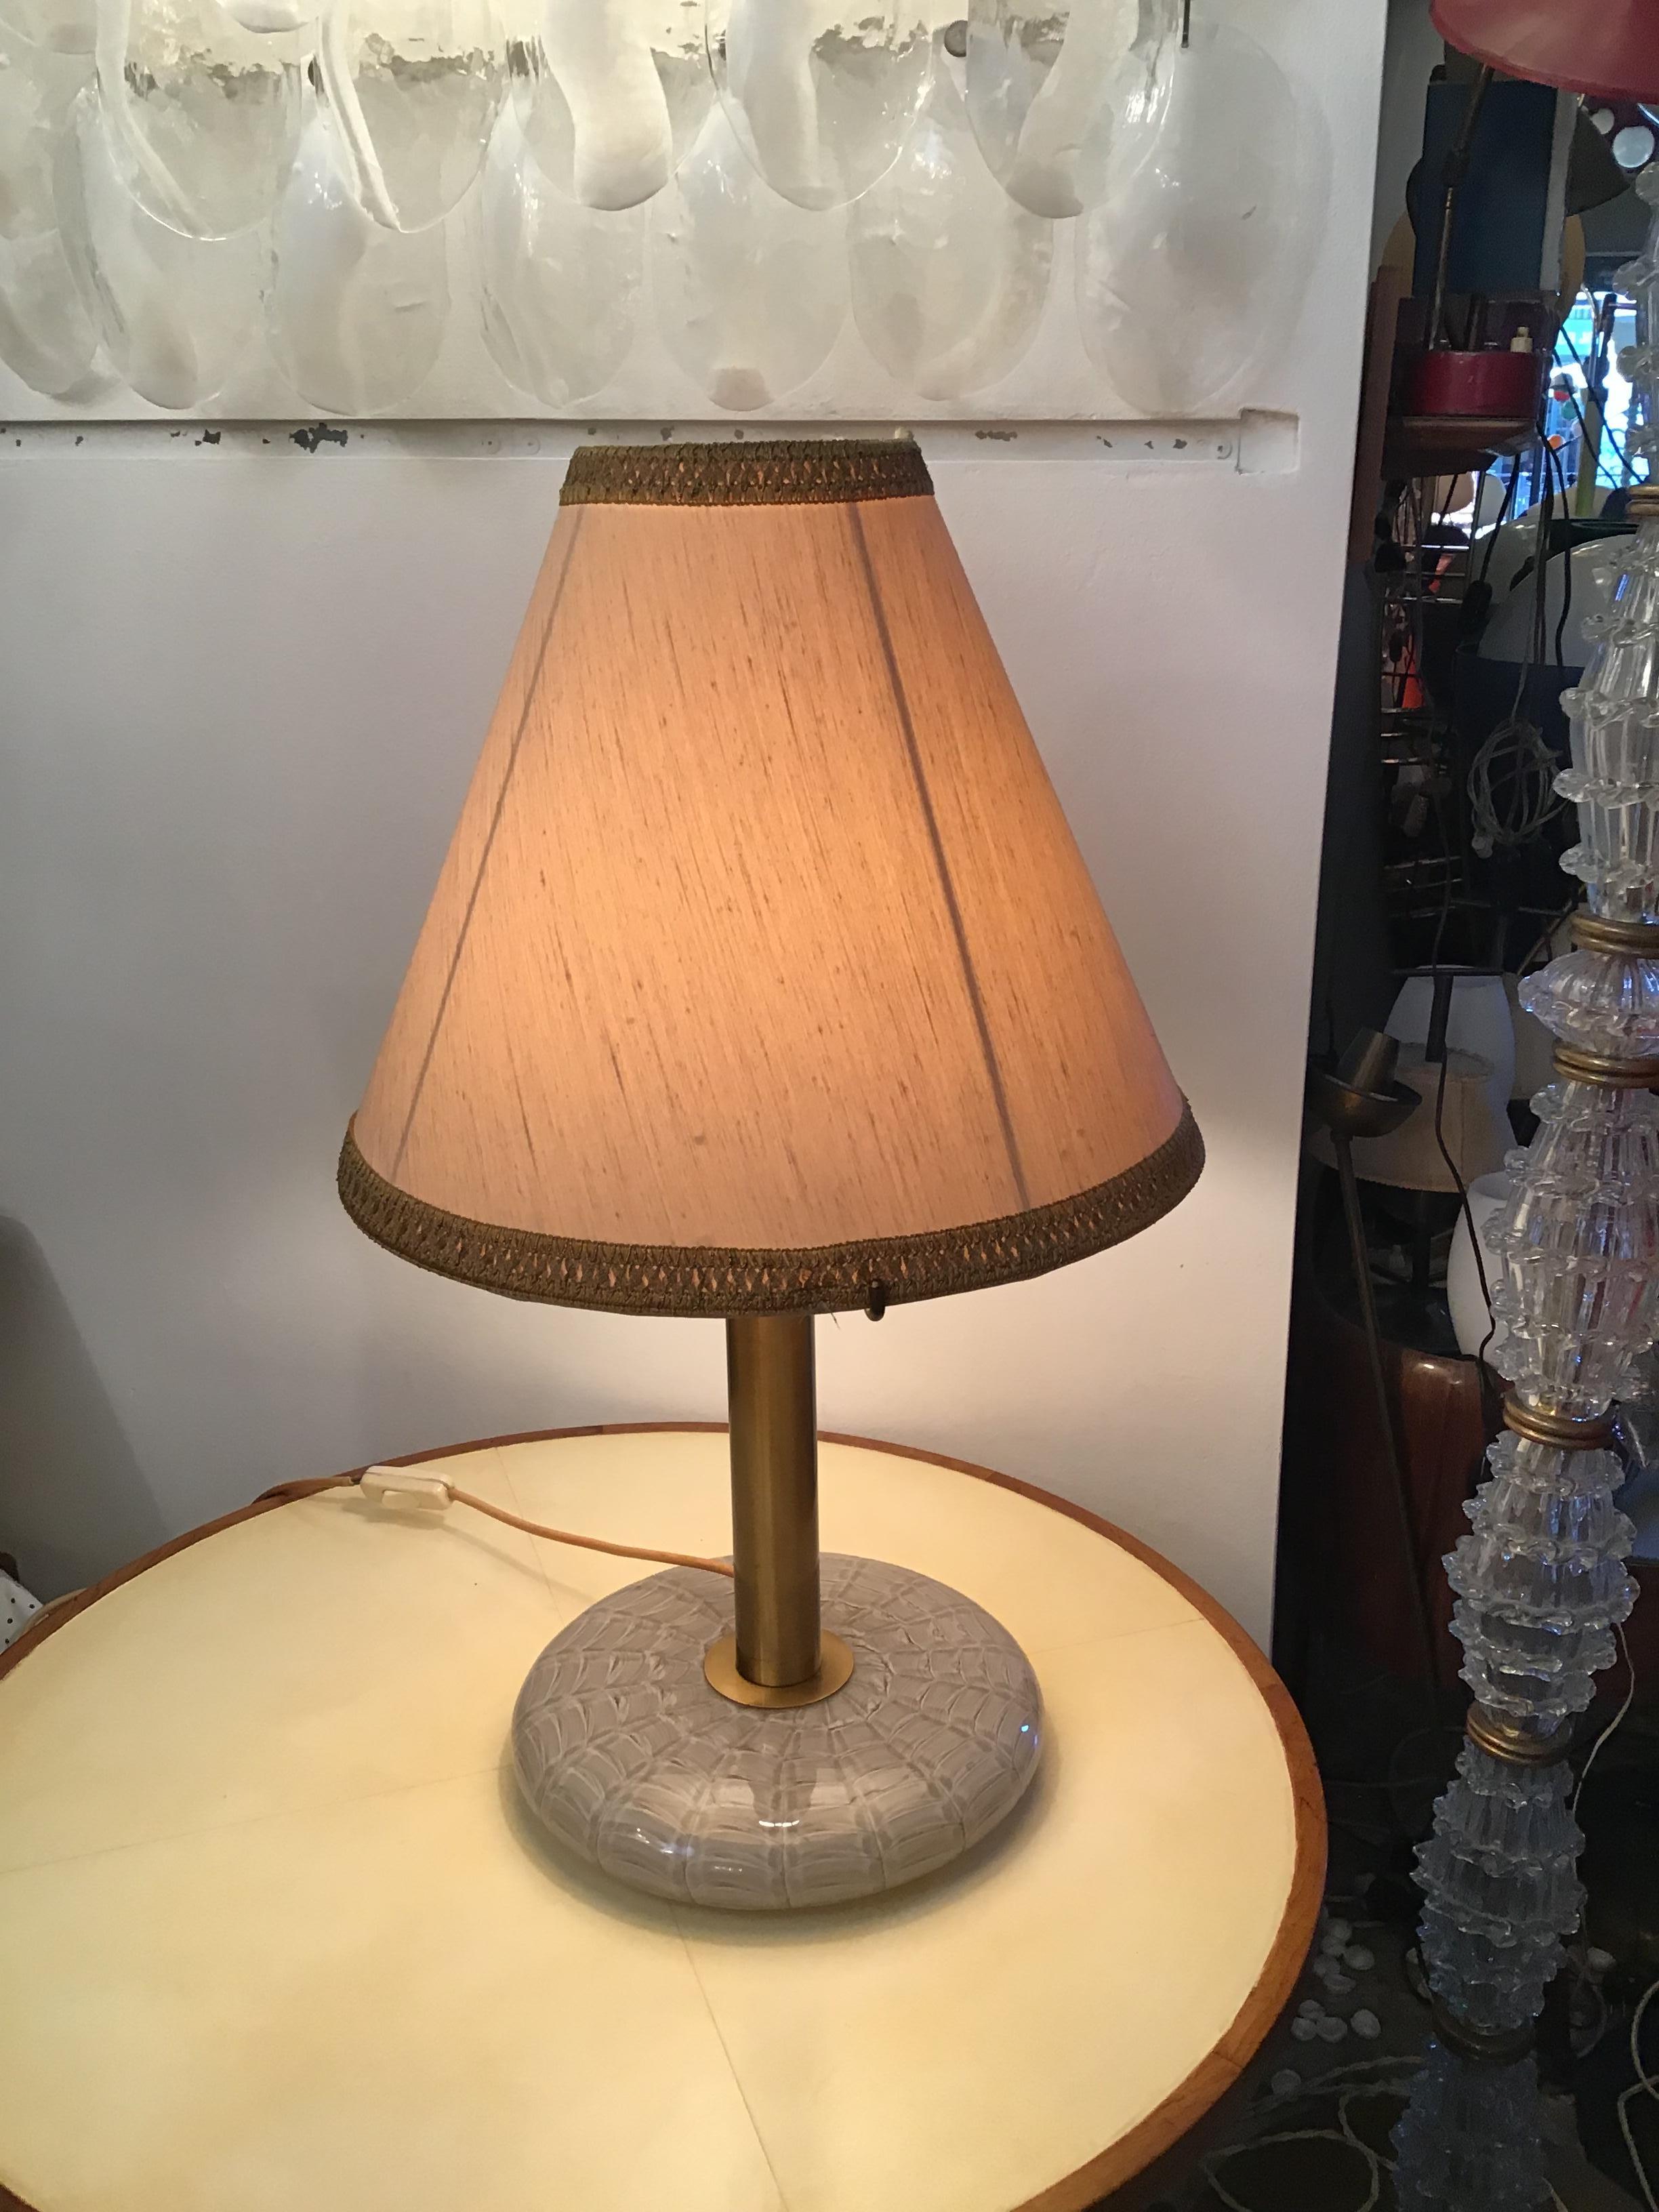 Seguso table lamp Feahered Murano glass brass frame and fabric lampshade, 1960.